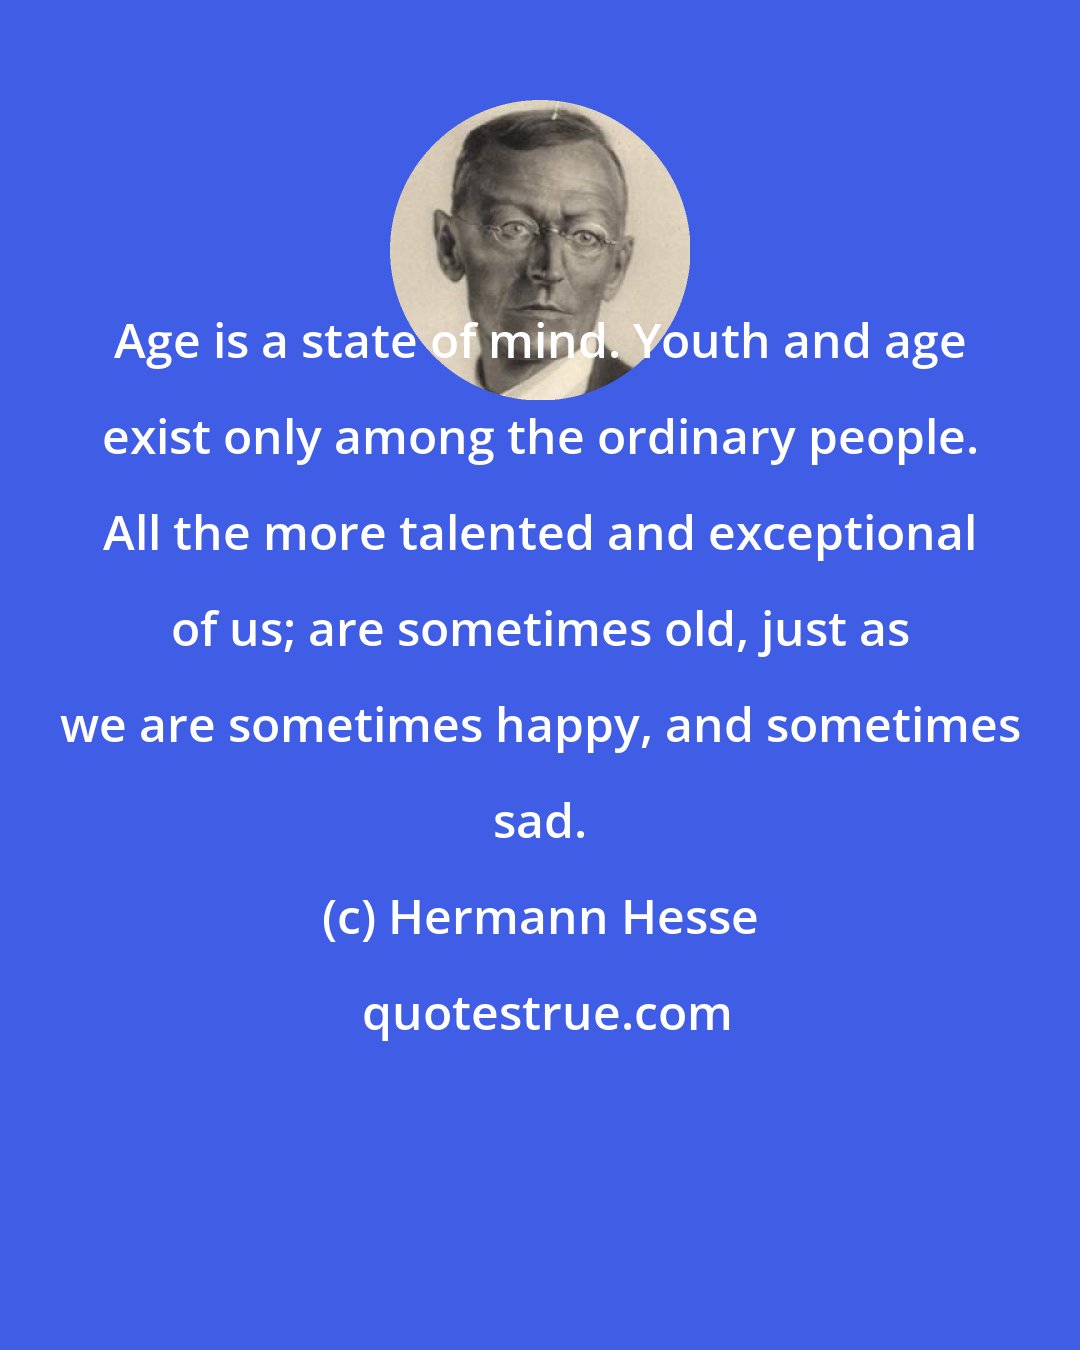 Hermann Hesse: Age is a state of mind. Youth and age exist only among the ordinary people. All the more talented and exceptional of us; are sometimes old, just as we are sometimes happy, and sometimes sad.